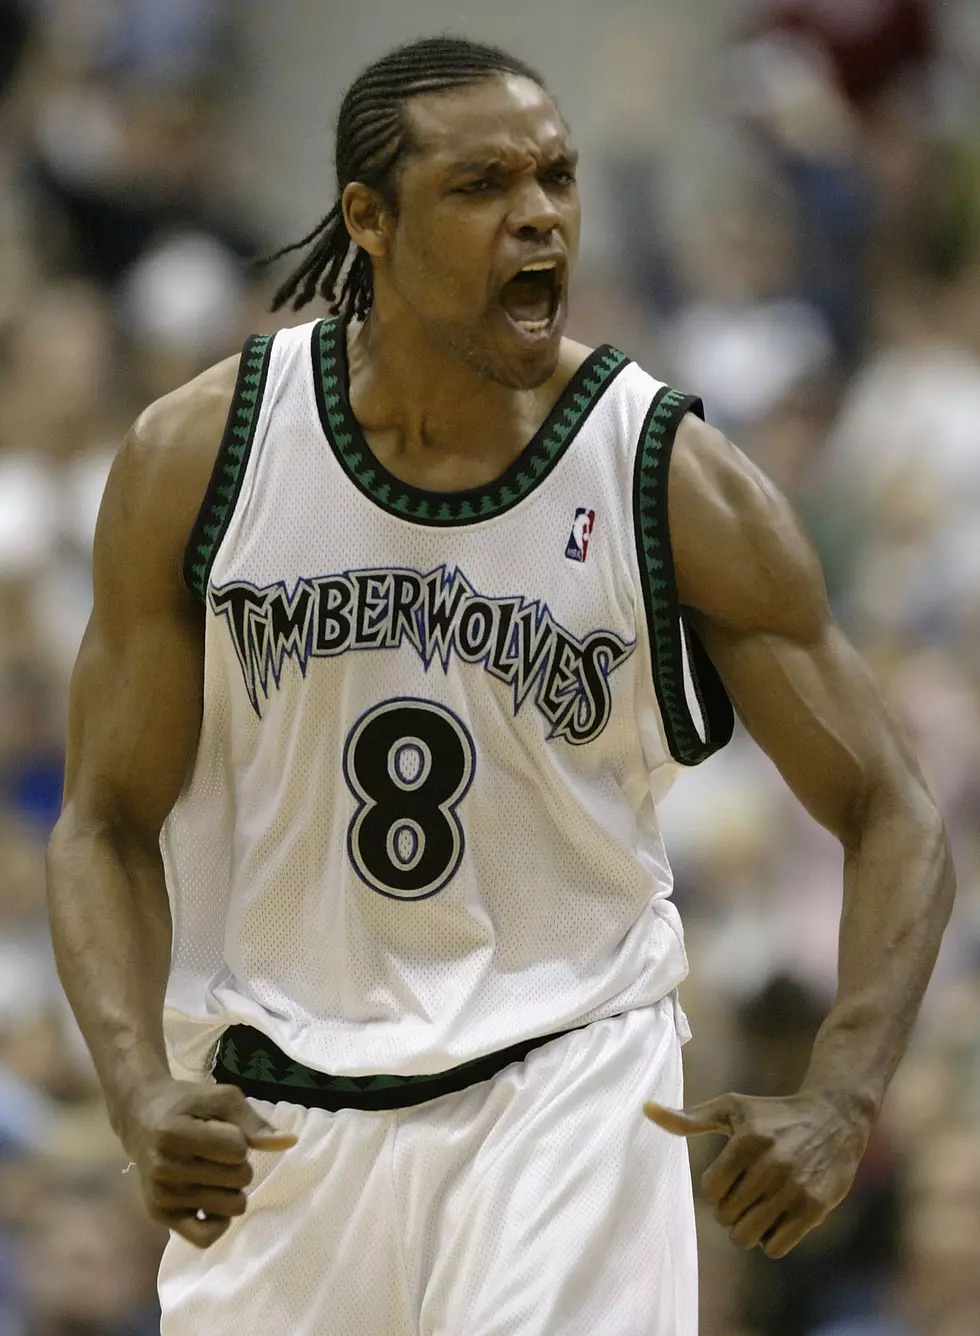 Sprewell still struggling to feed his family